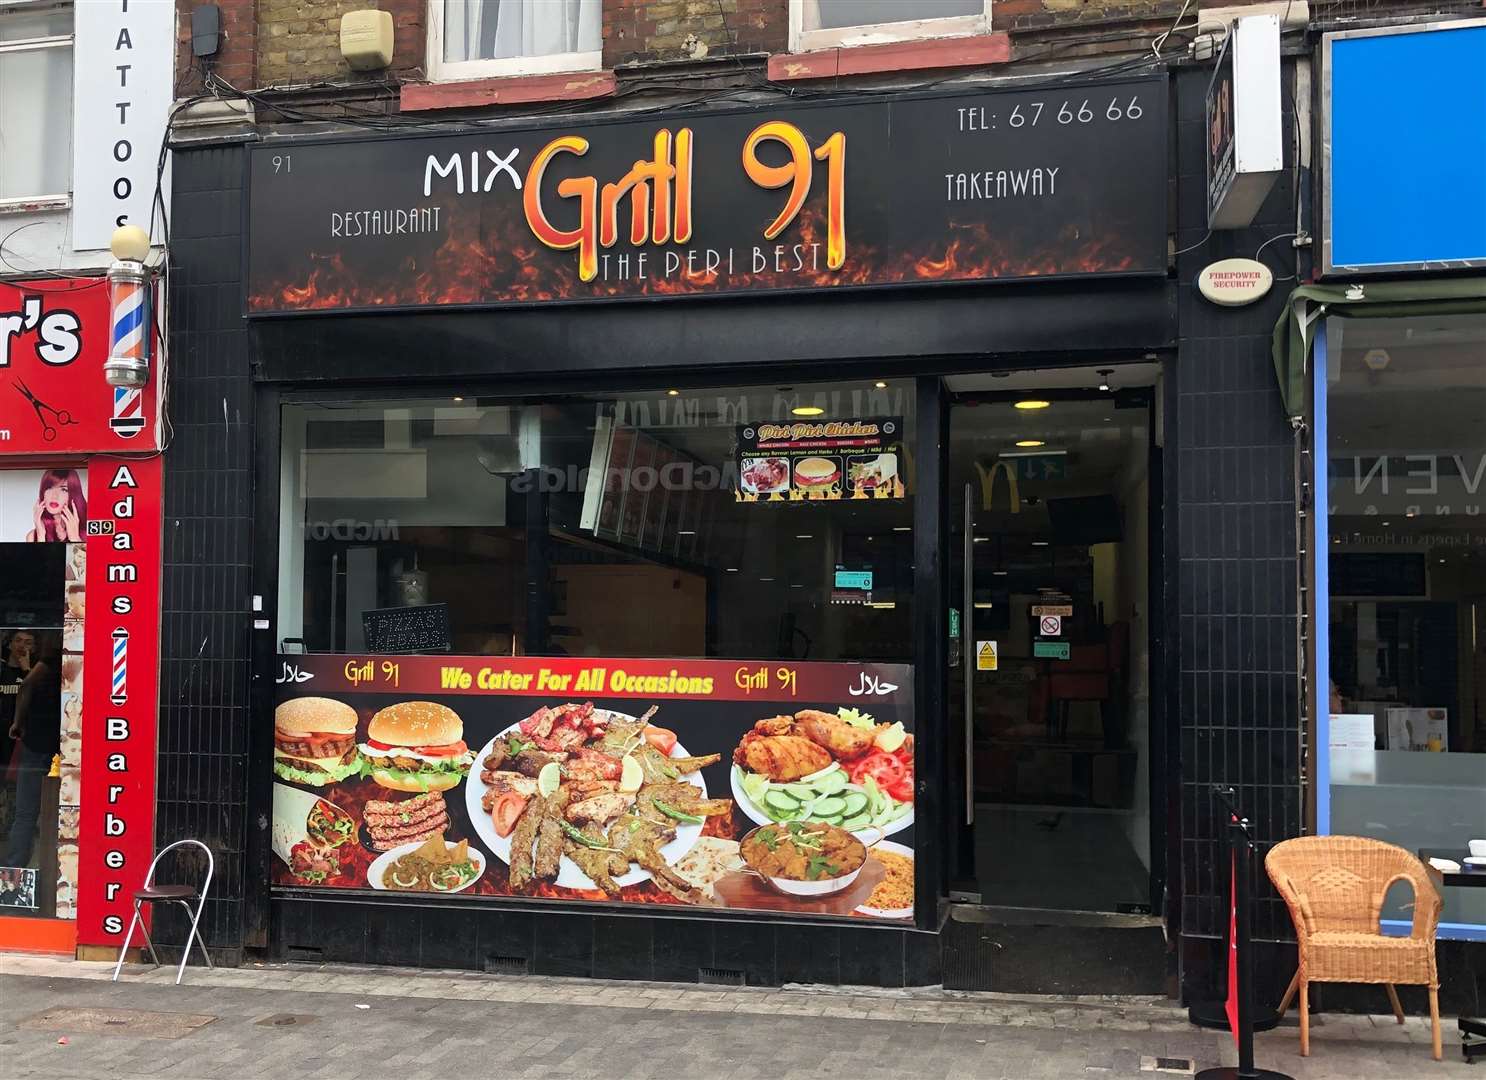 Mix Grill 91, in Week Street, Maidstone